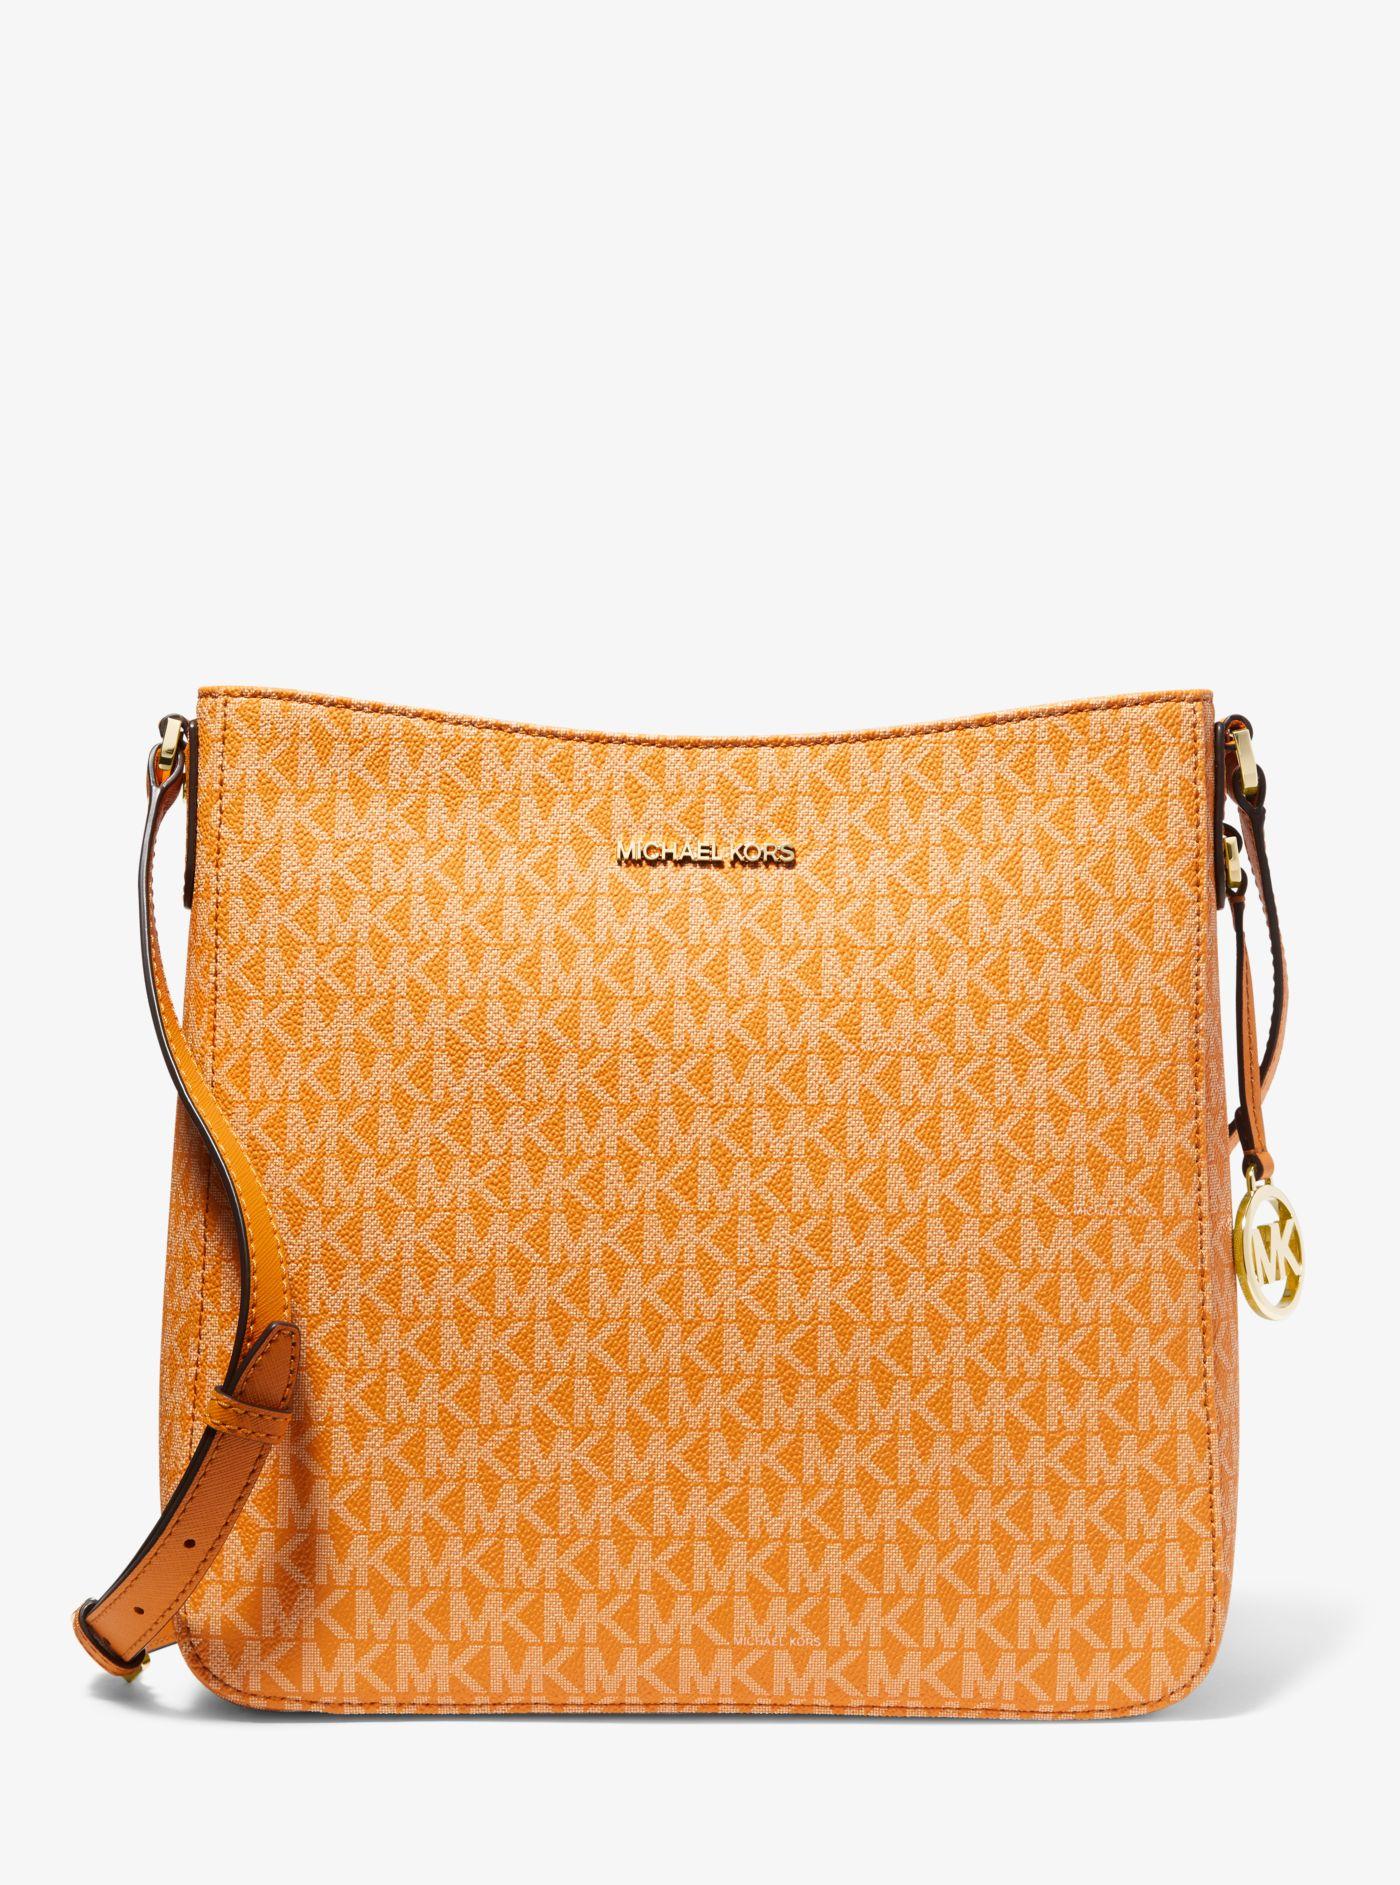 MICHAEL KORS JET SET TOTE  Classic  Cute Pretty  Preppy Home  Style  Finds for Young Old  Everyone in Between